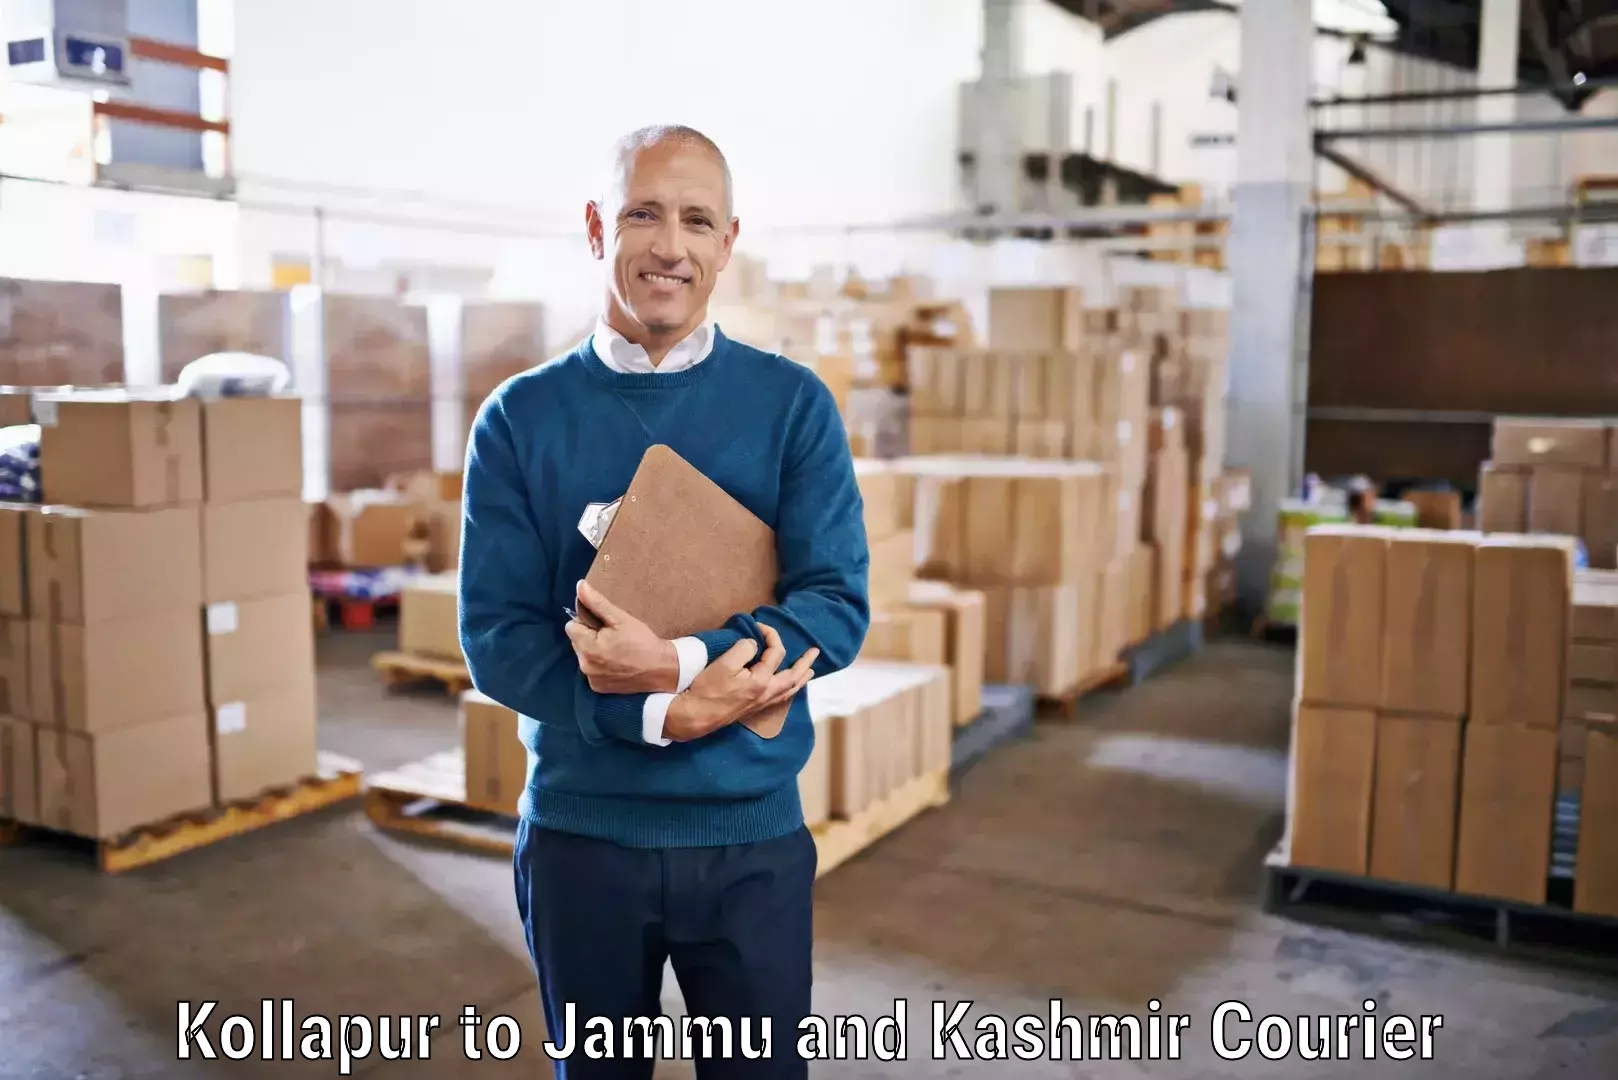 Global courier networks Kollapur to Sopore